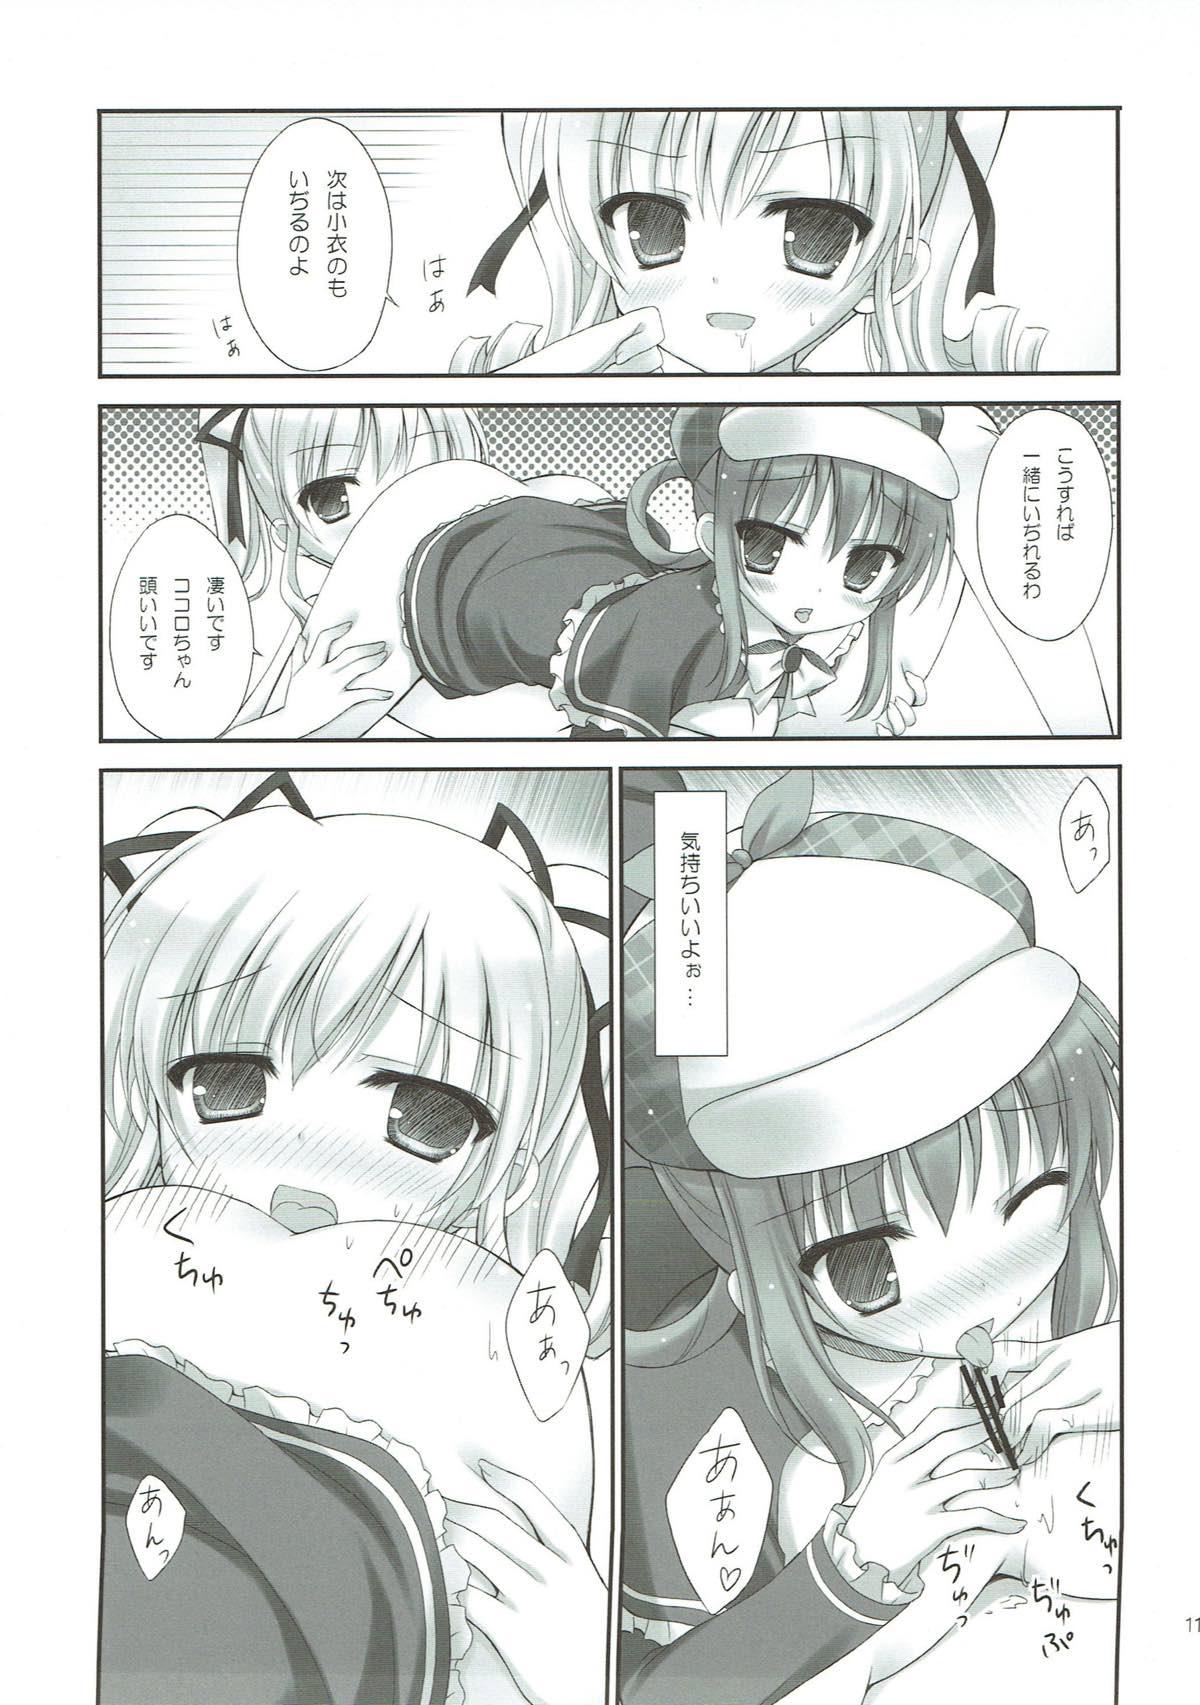 Squirting Milky Time* - Tantei opera milky holmes Group - Page 10